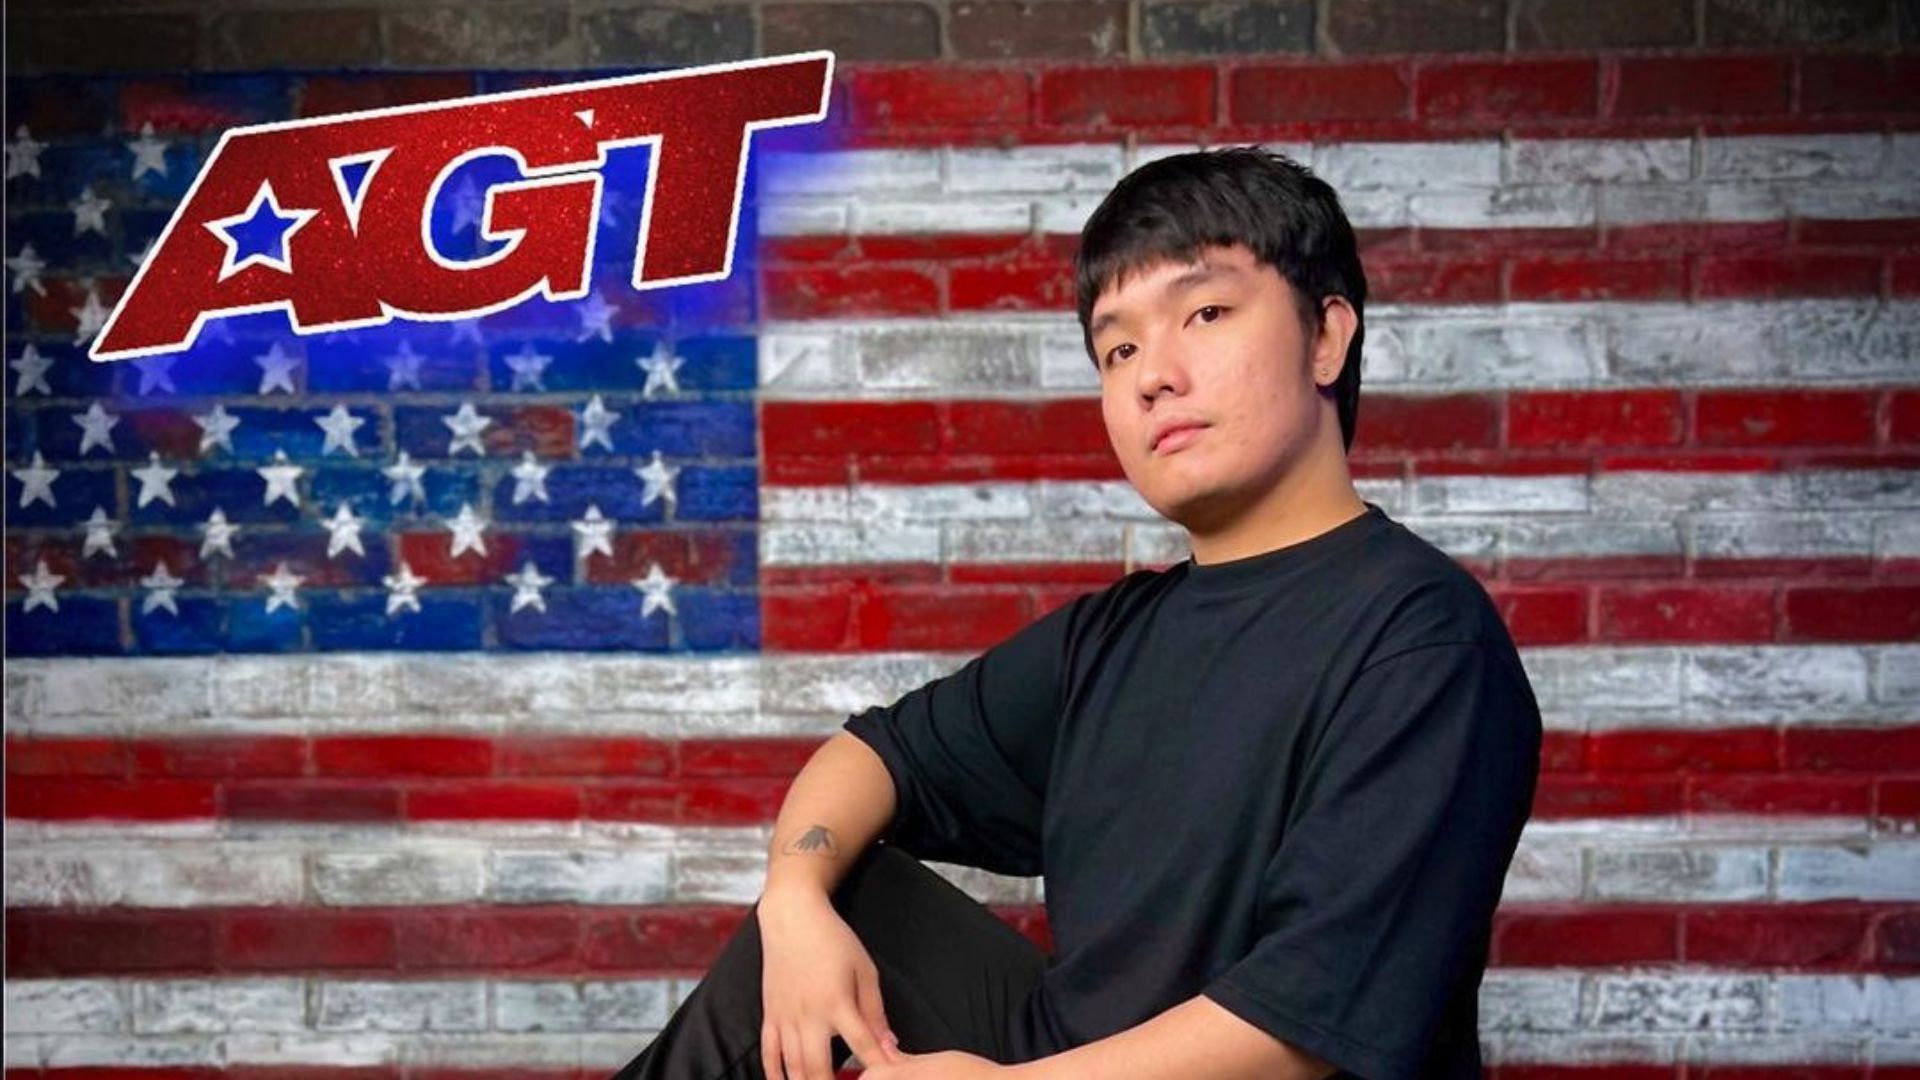 Shadow Ace will be performing on AGT season 18